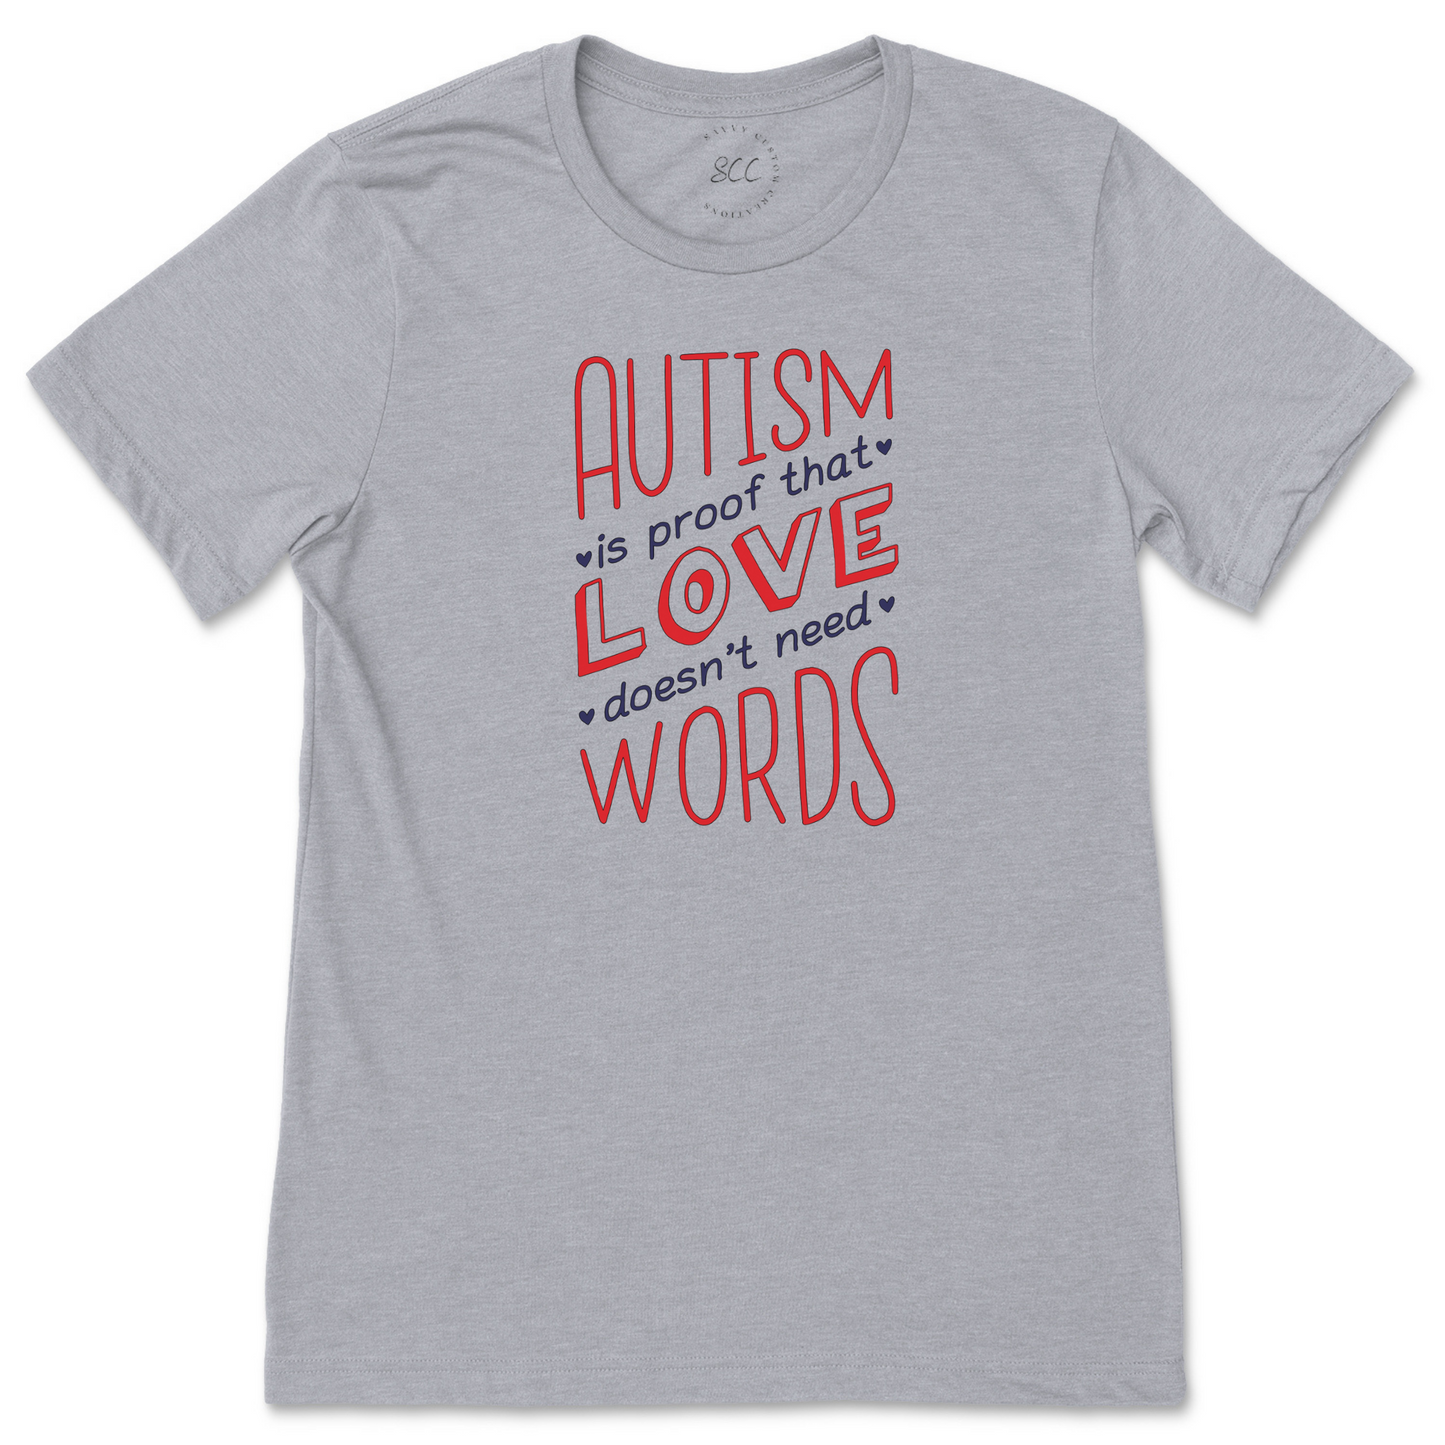 AUTISM IS PROOF THAT LOVE DOESN’T NEED WORDS - Unisex Crewneck T-Shirt